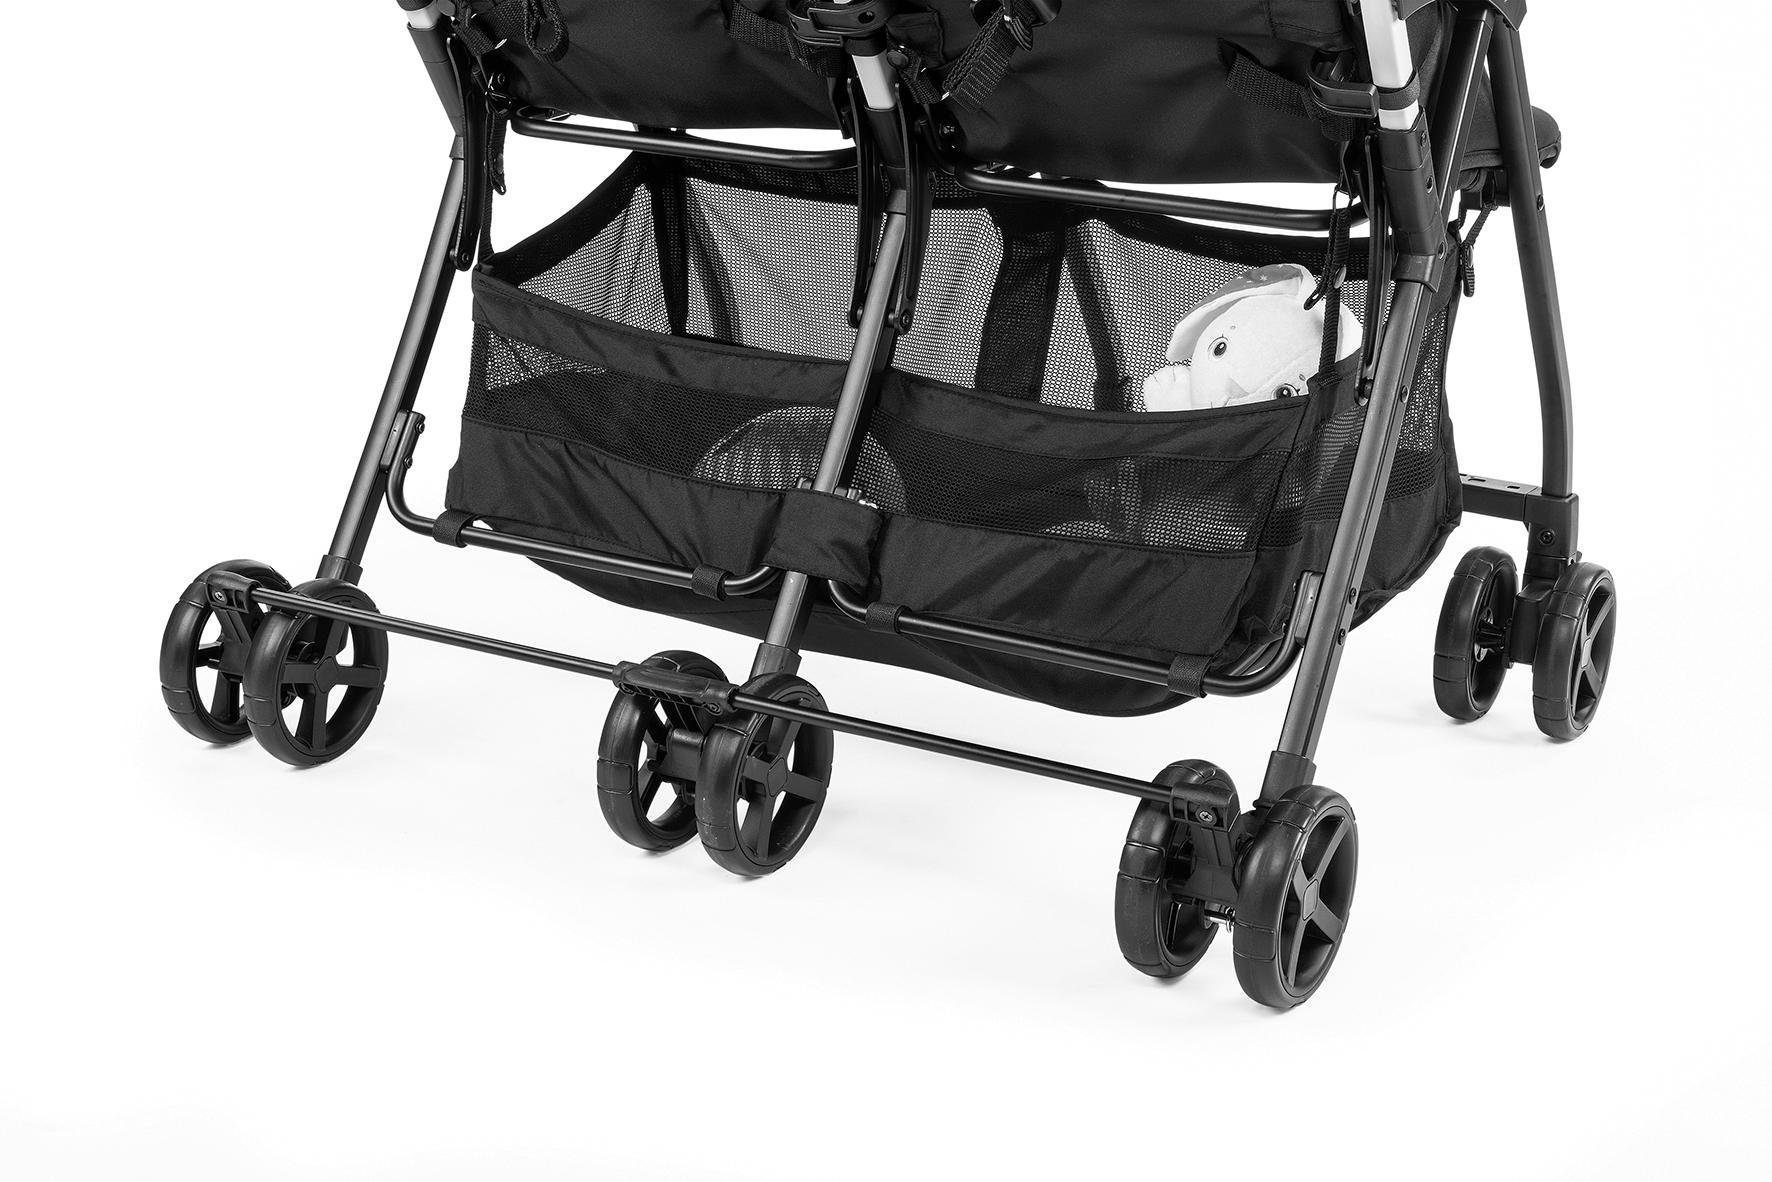 OHlalà Zwillingsbuggy Cat, Twin, Zwillingskinderwagen Chicco Silver